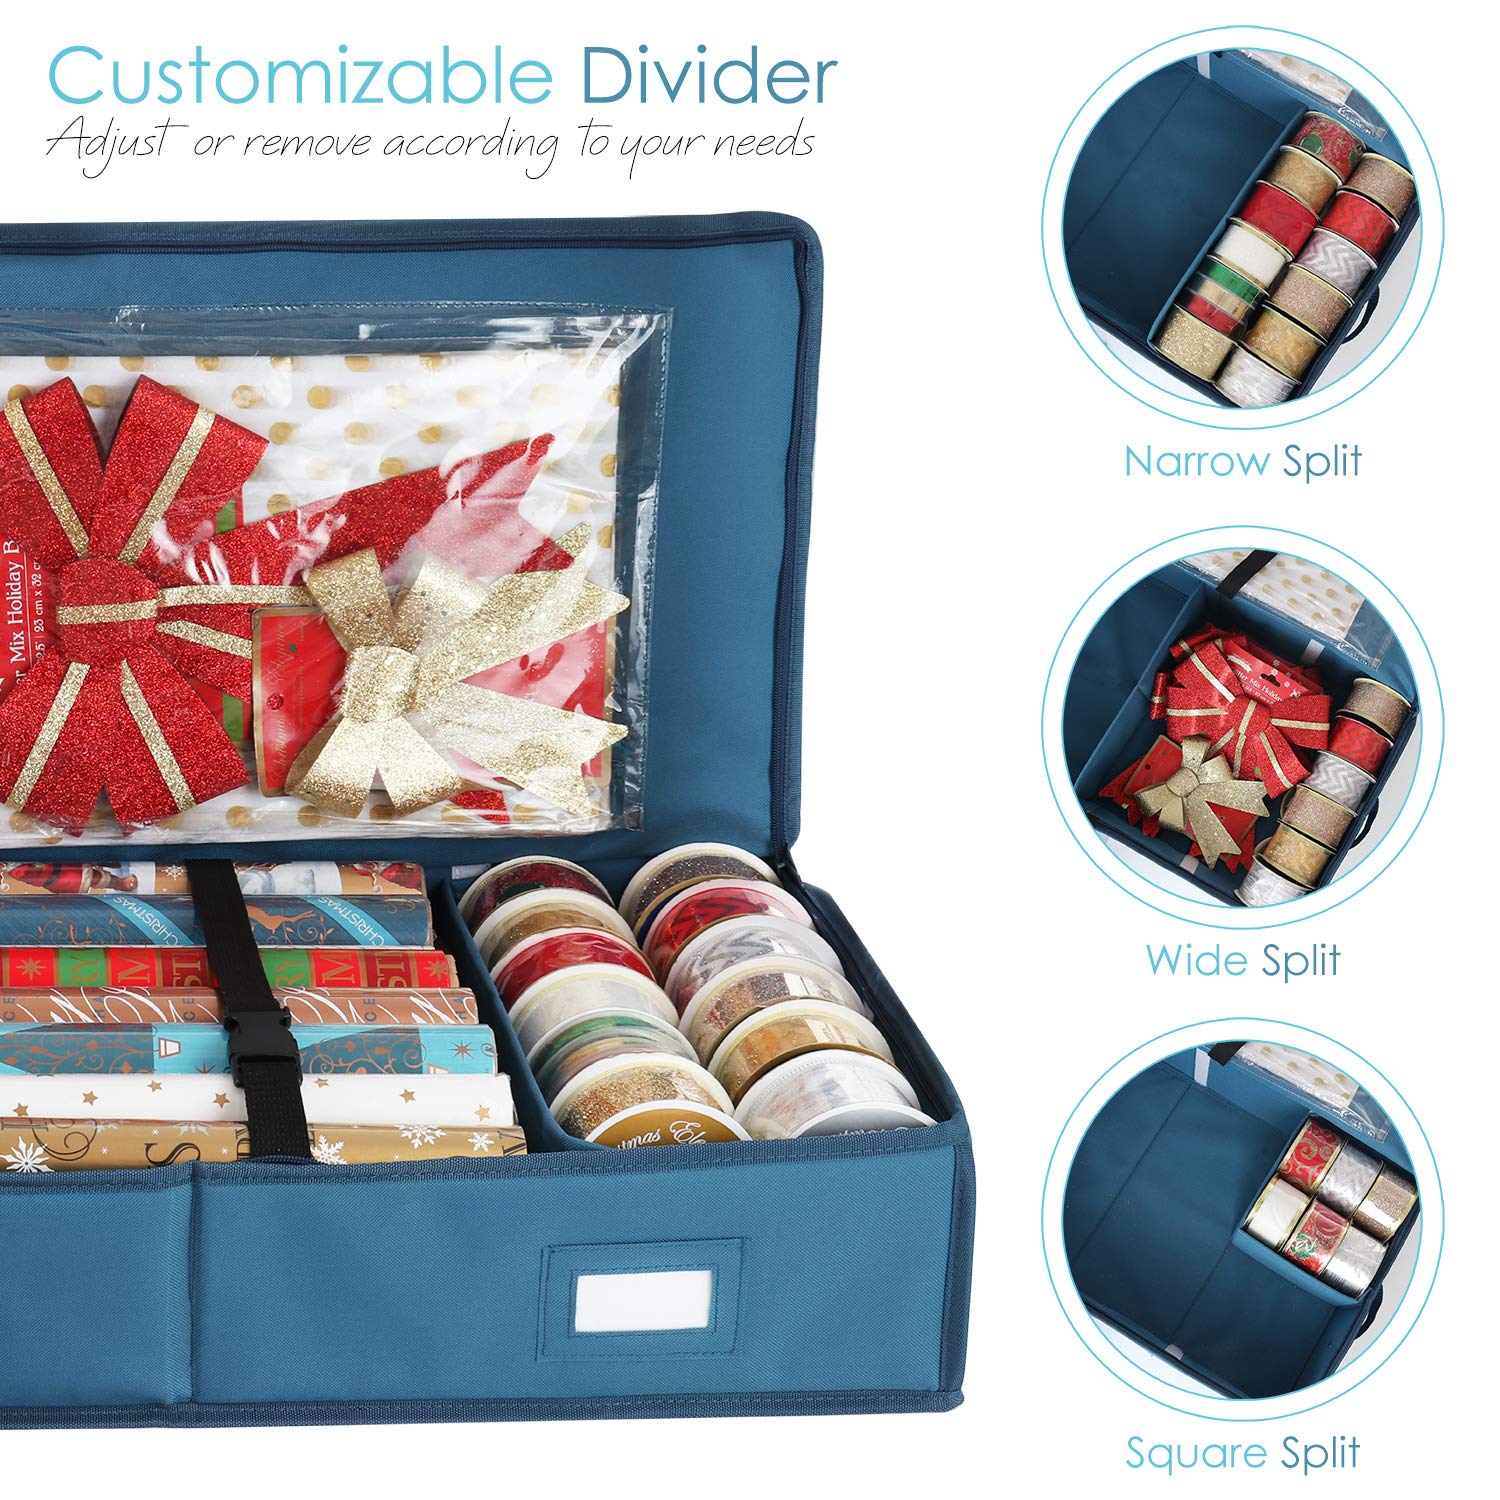 Hearth & Harbor Wrapping Paper Storage Container - Christmas Storage Bag with Interior Pockets - Gift Wrapping Organizer Storage Fits Up to 22 Rolls of 40